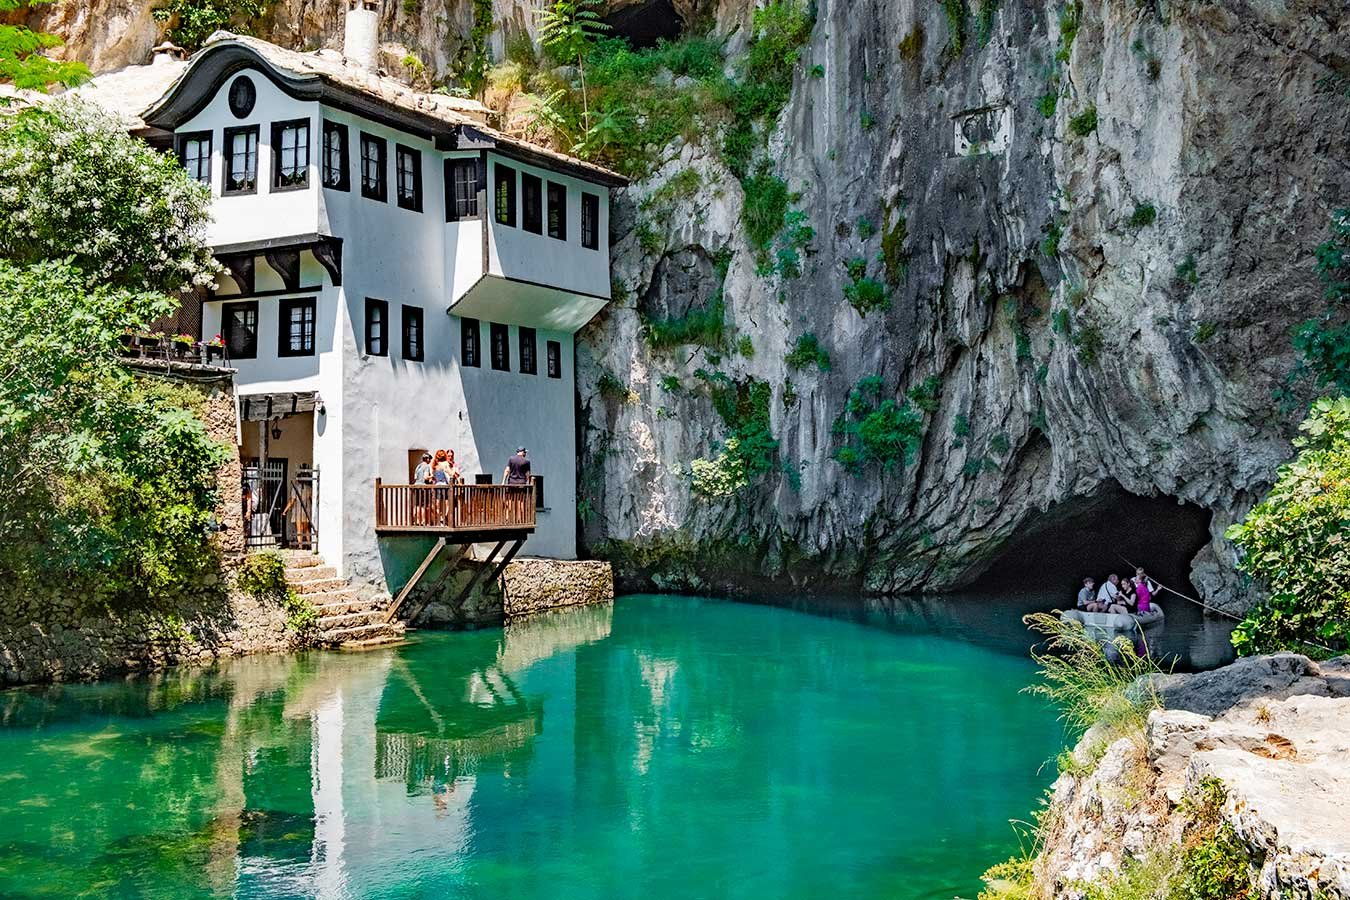 How to Get to Blagaj by Public Transport